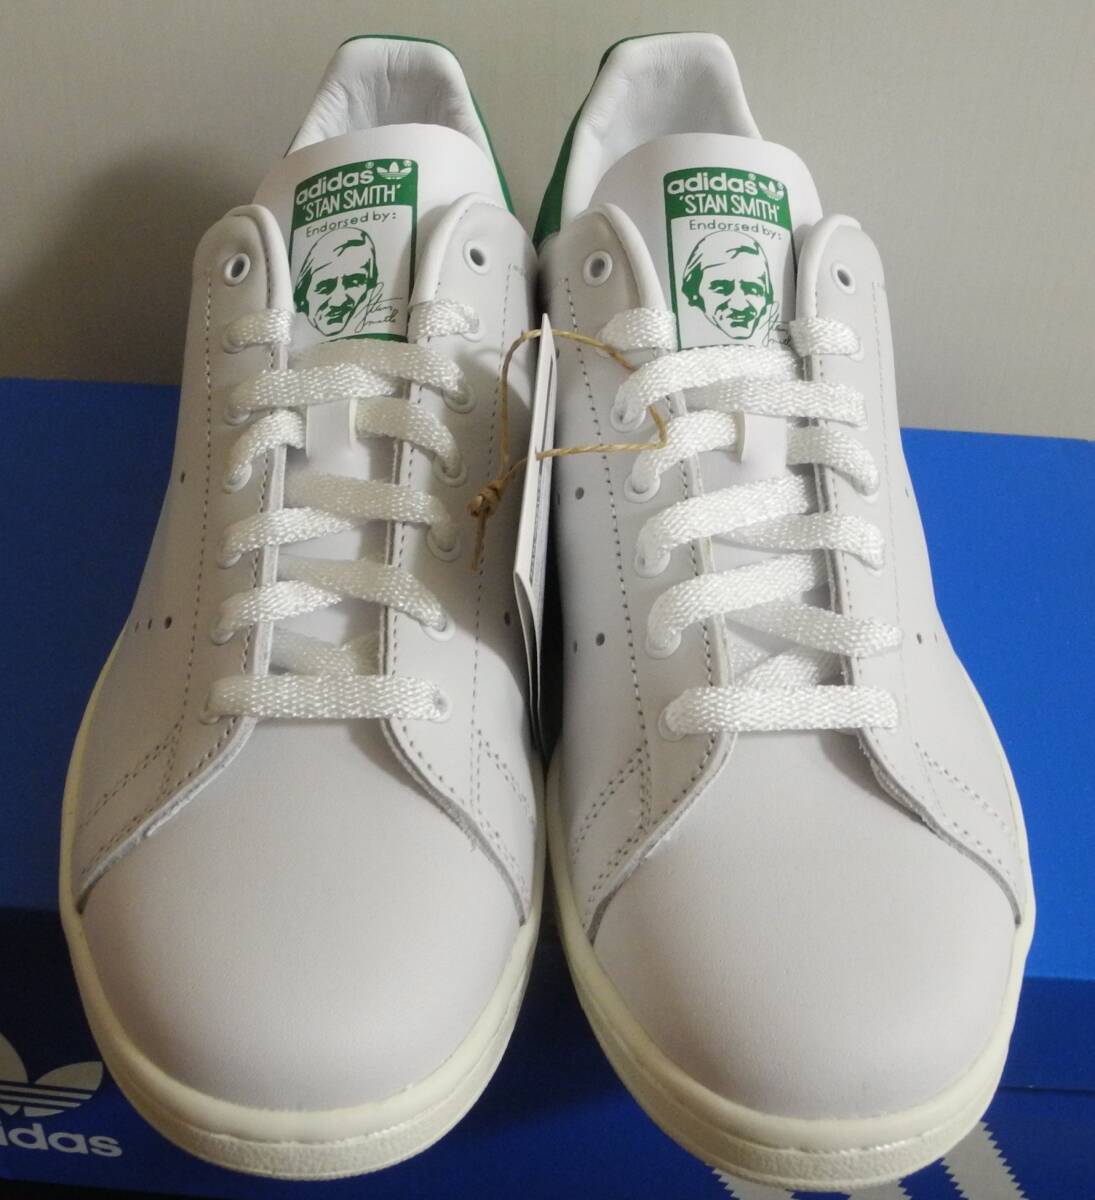  new goods Stansmith 80s 2023 year made JP27.0cm regular price 19,800 jpy IF0202 white × green natural leather adidas stansmith original leather white × green 